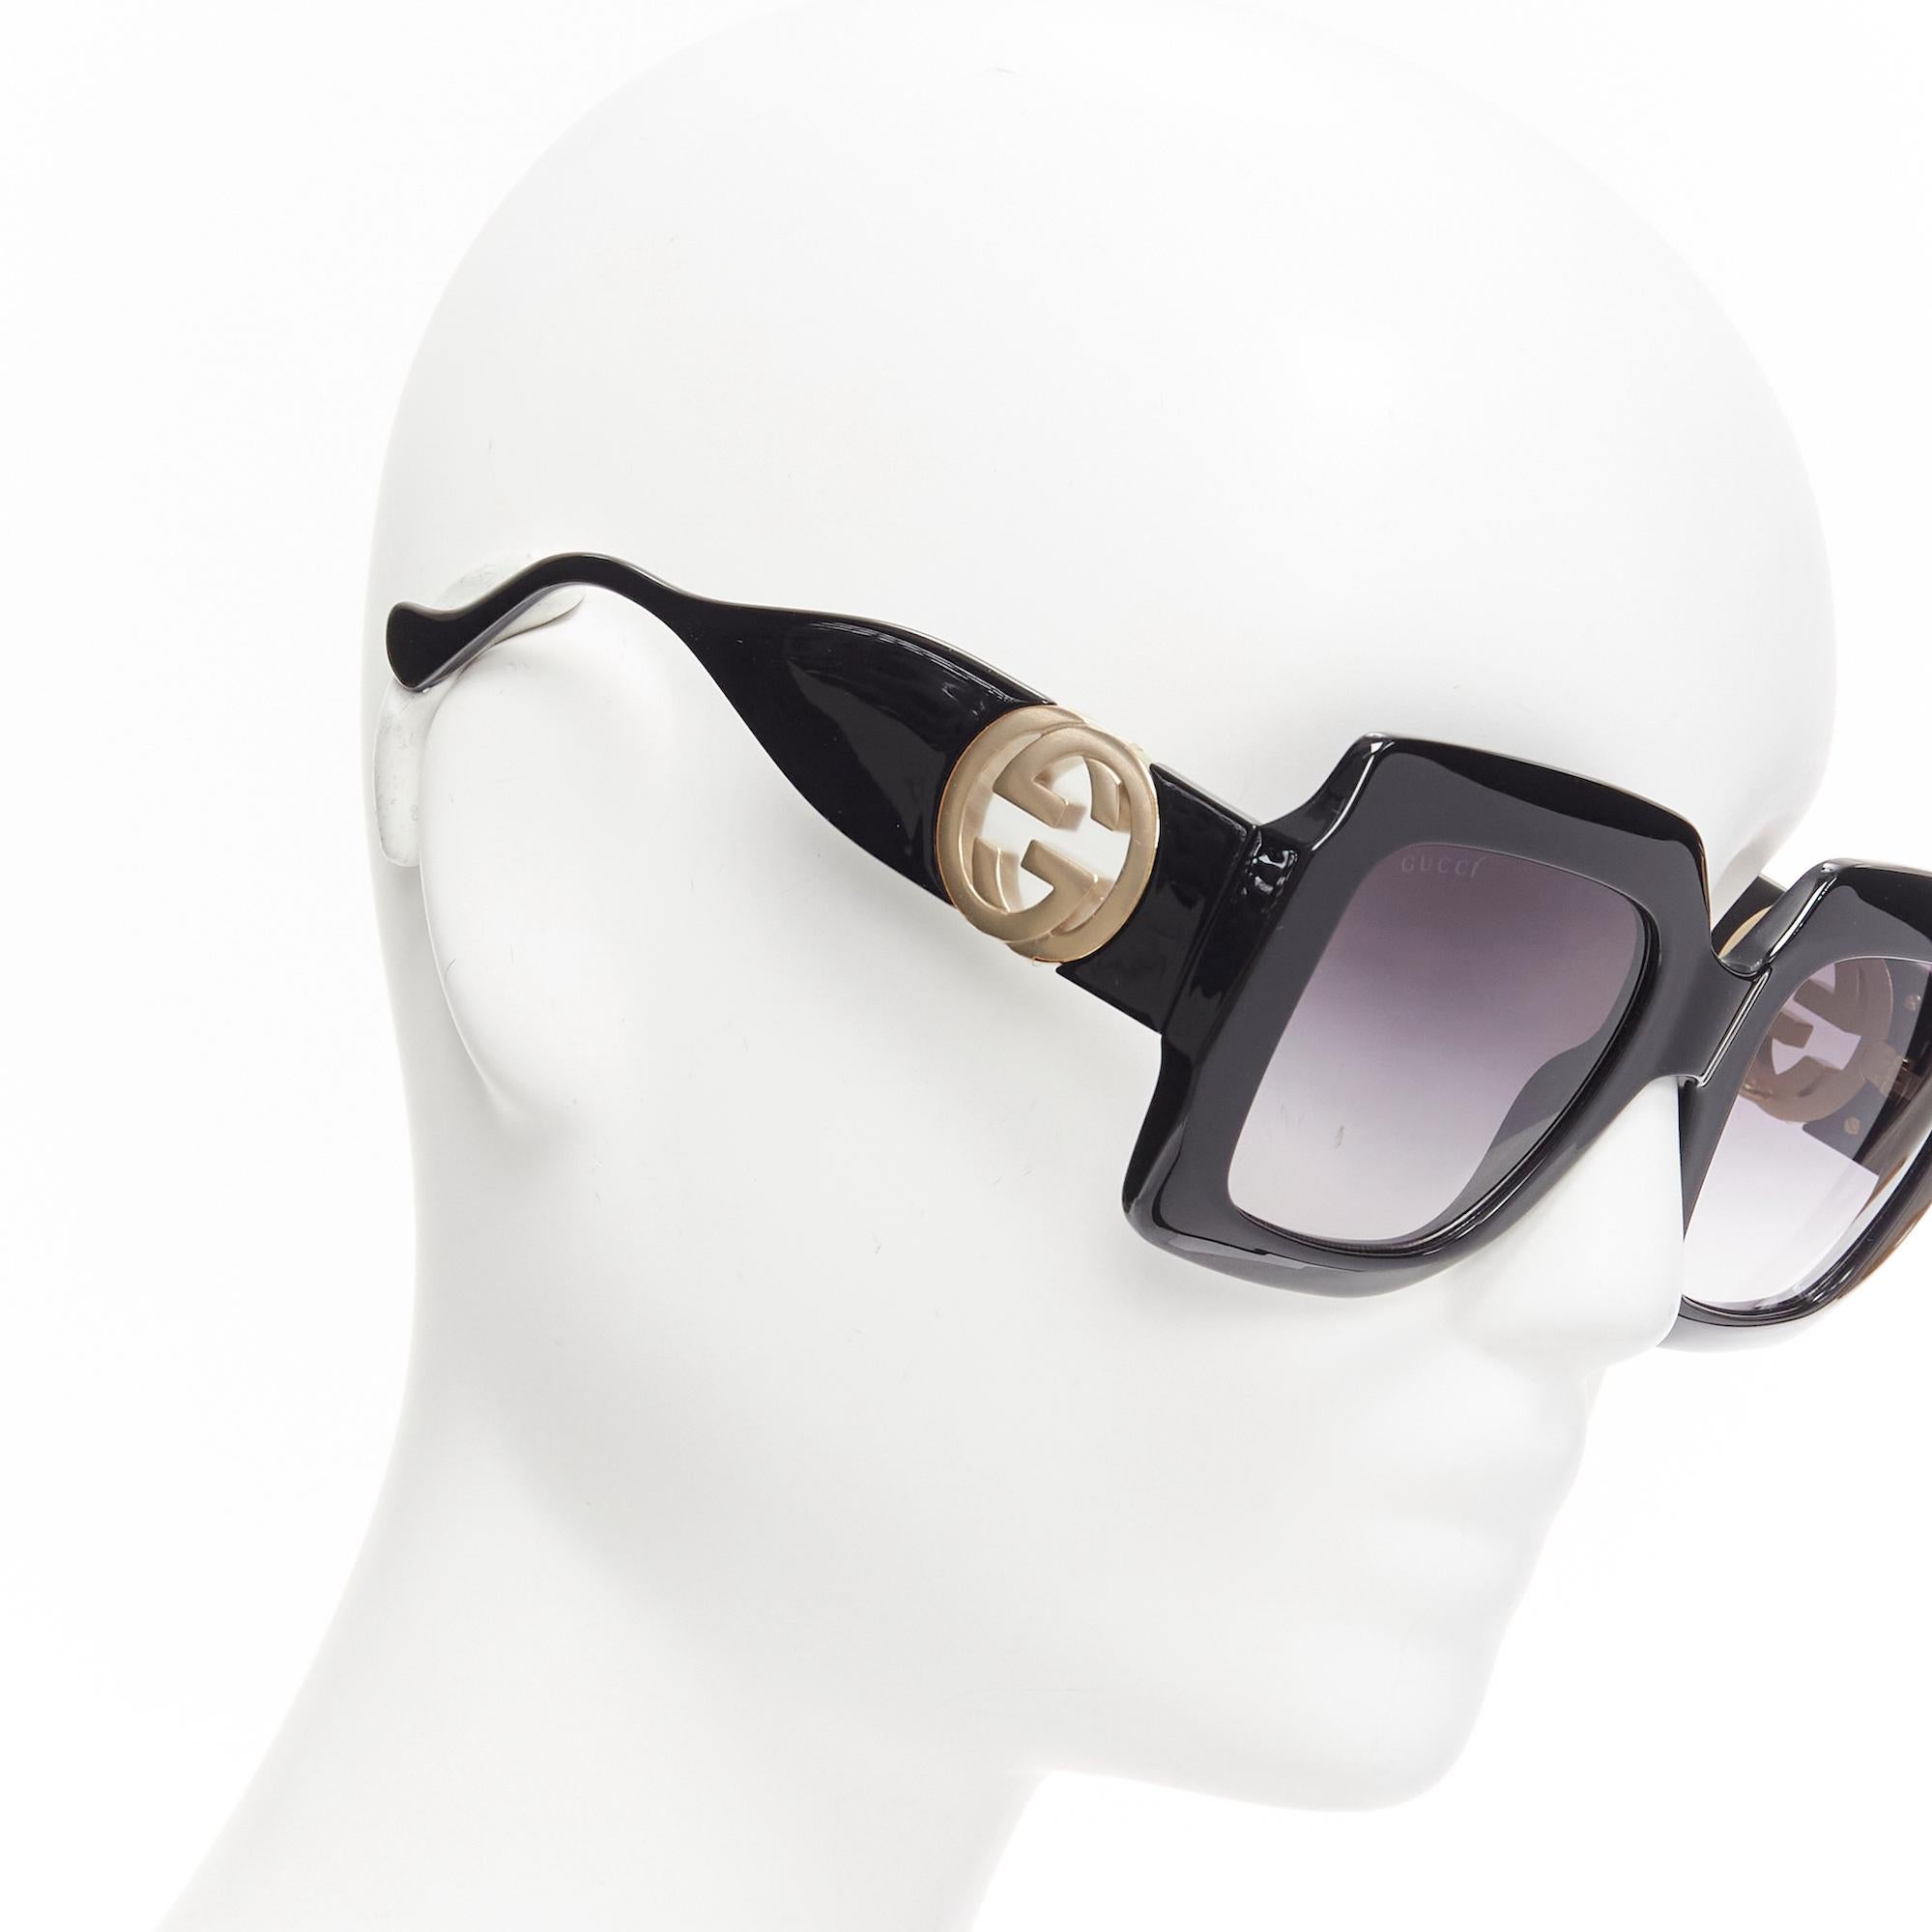 GUCCI Alessandro Michele GG1022S black gold GG logo oversized sunglasses
Reference: TGAS/D01041
Brand: Gucci
Designer: Alessandro Michele
Material: Acetate
Color: Black, Gold
Pattern: Solid
Lining: Black Acetate
Extra Details: GG logo at sides.
Made